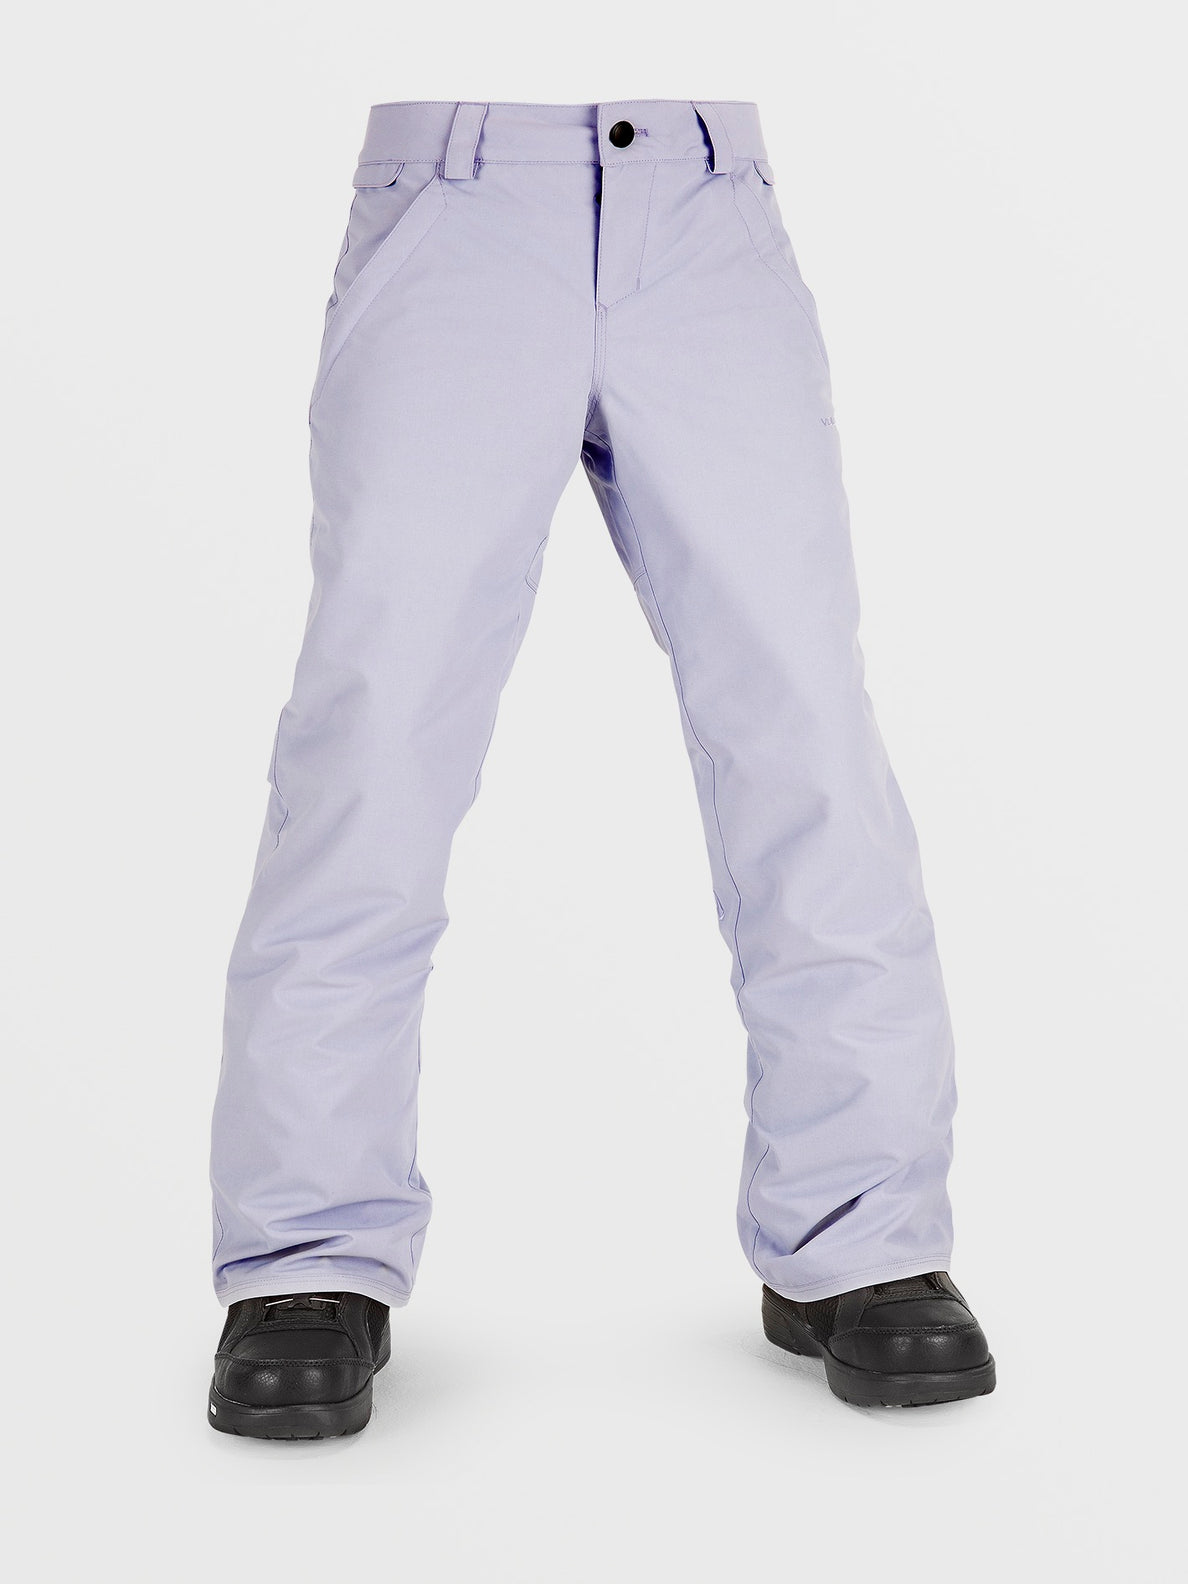 Kids Frochickidee Insulated Pants - Lilac Ash (N1252400_LCA) [F]